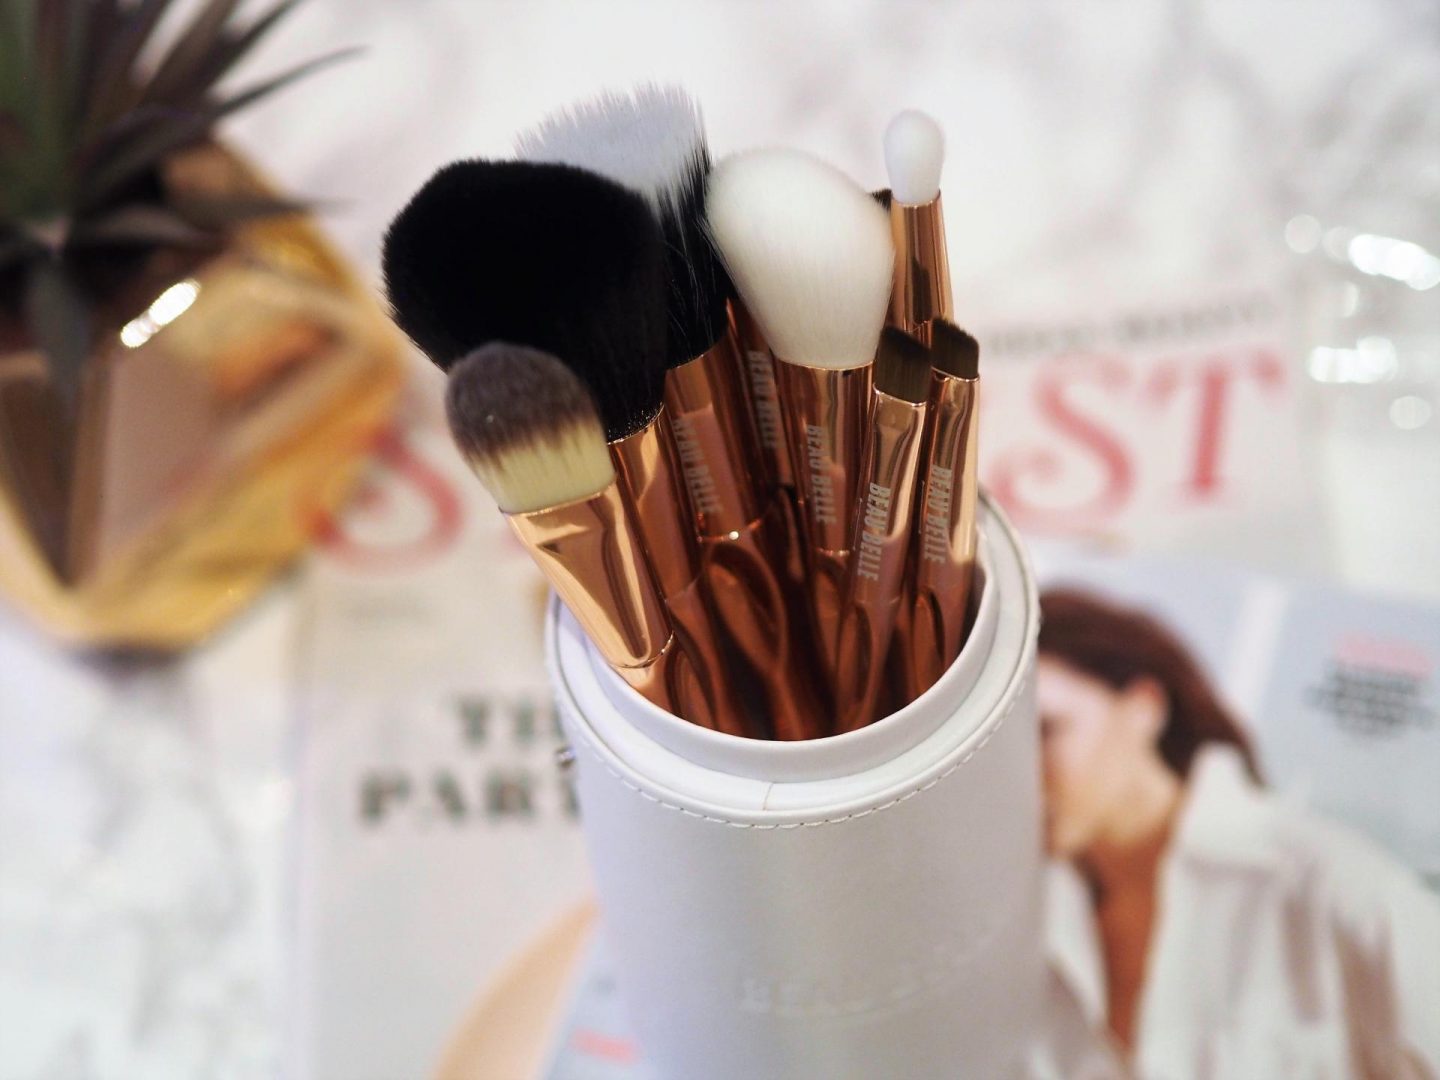 New Make-Up Brushes And How To Clean Them